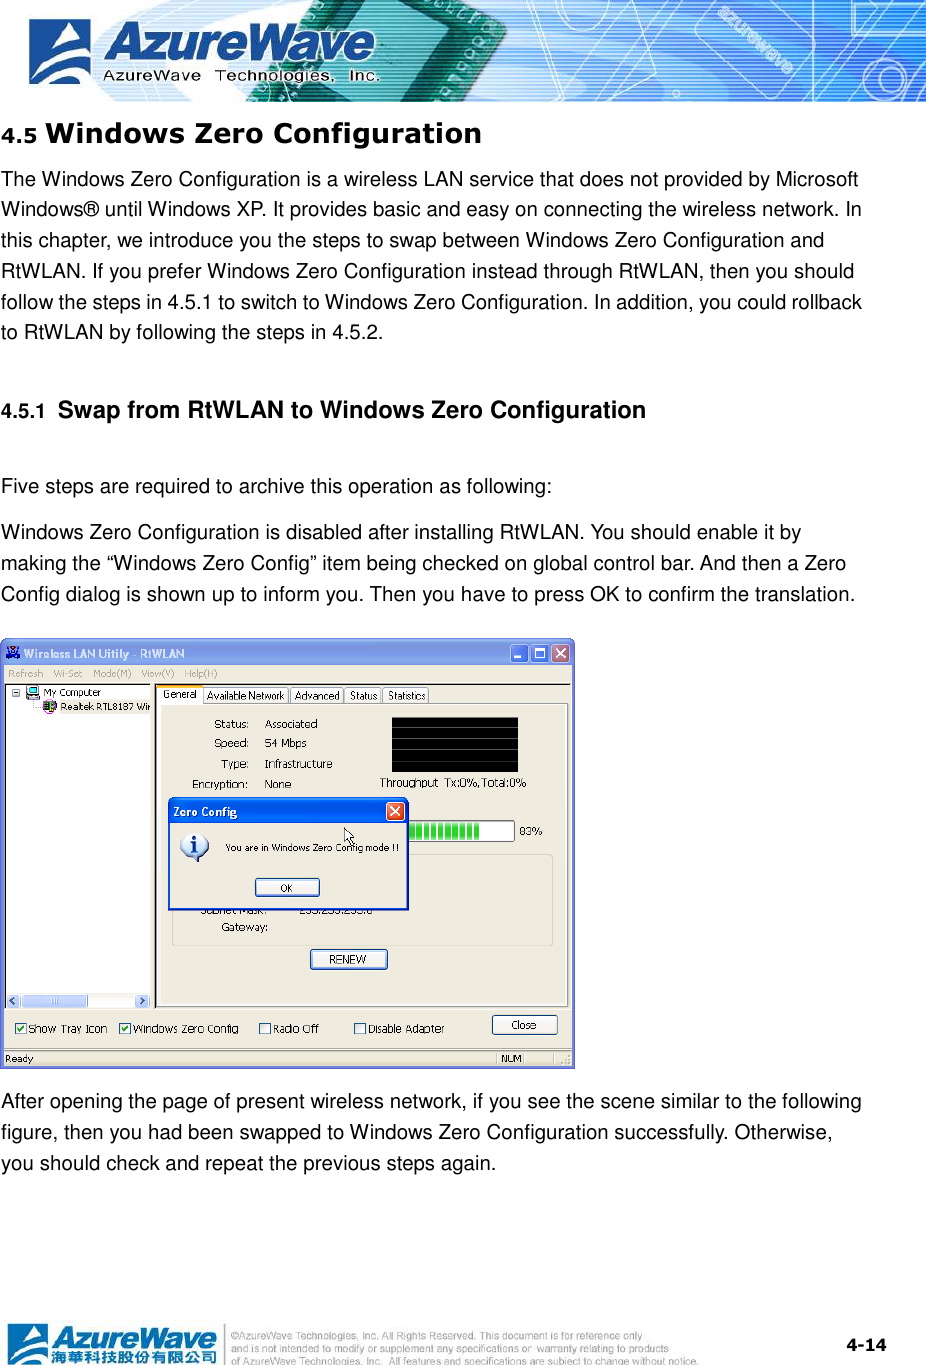  4-14 4.5 Windows Zero Configuration The Windows Zero Configuration is a wireless LAN service that does not provided by Microsoft Windows® until Windows XP. It provides basic and easy on connecting the wireless network. In this chapter, we introduce you the steps to swap between Windows Zero Configuration and RtWLAN. If you prefer Windows Zero Configuration instead through RtWLAN, then you should follow the steps in 4.5.1 to switch to Windows Zero Configuration. In addition, you could rollback to RtWLAN by following the steps in 4.5.2. 4.5.1  Swap from RtWLAN to Windows Zero Configuration Five steps are required to archive this operation as following: Windows Zero Configuration is disabled after installing RtWLAN. You should enable it by making the “Windows Zero Config” item being checked on global control bar. And then a Zero Config dialog is shown up to inform you. Then you have to press OK to confirm the translation.           After opening the page of present wireless network, if you see the scene similar to the following figure, then you had been swapped to Windows Zero Configuration successfully. Otherwise, you should check and repeat the previous steps again. 